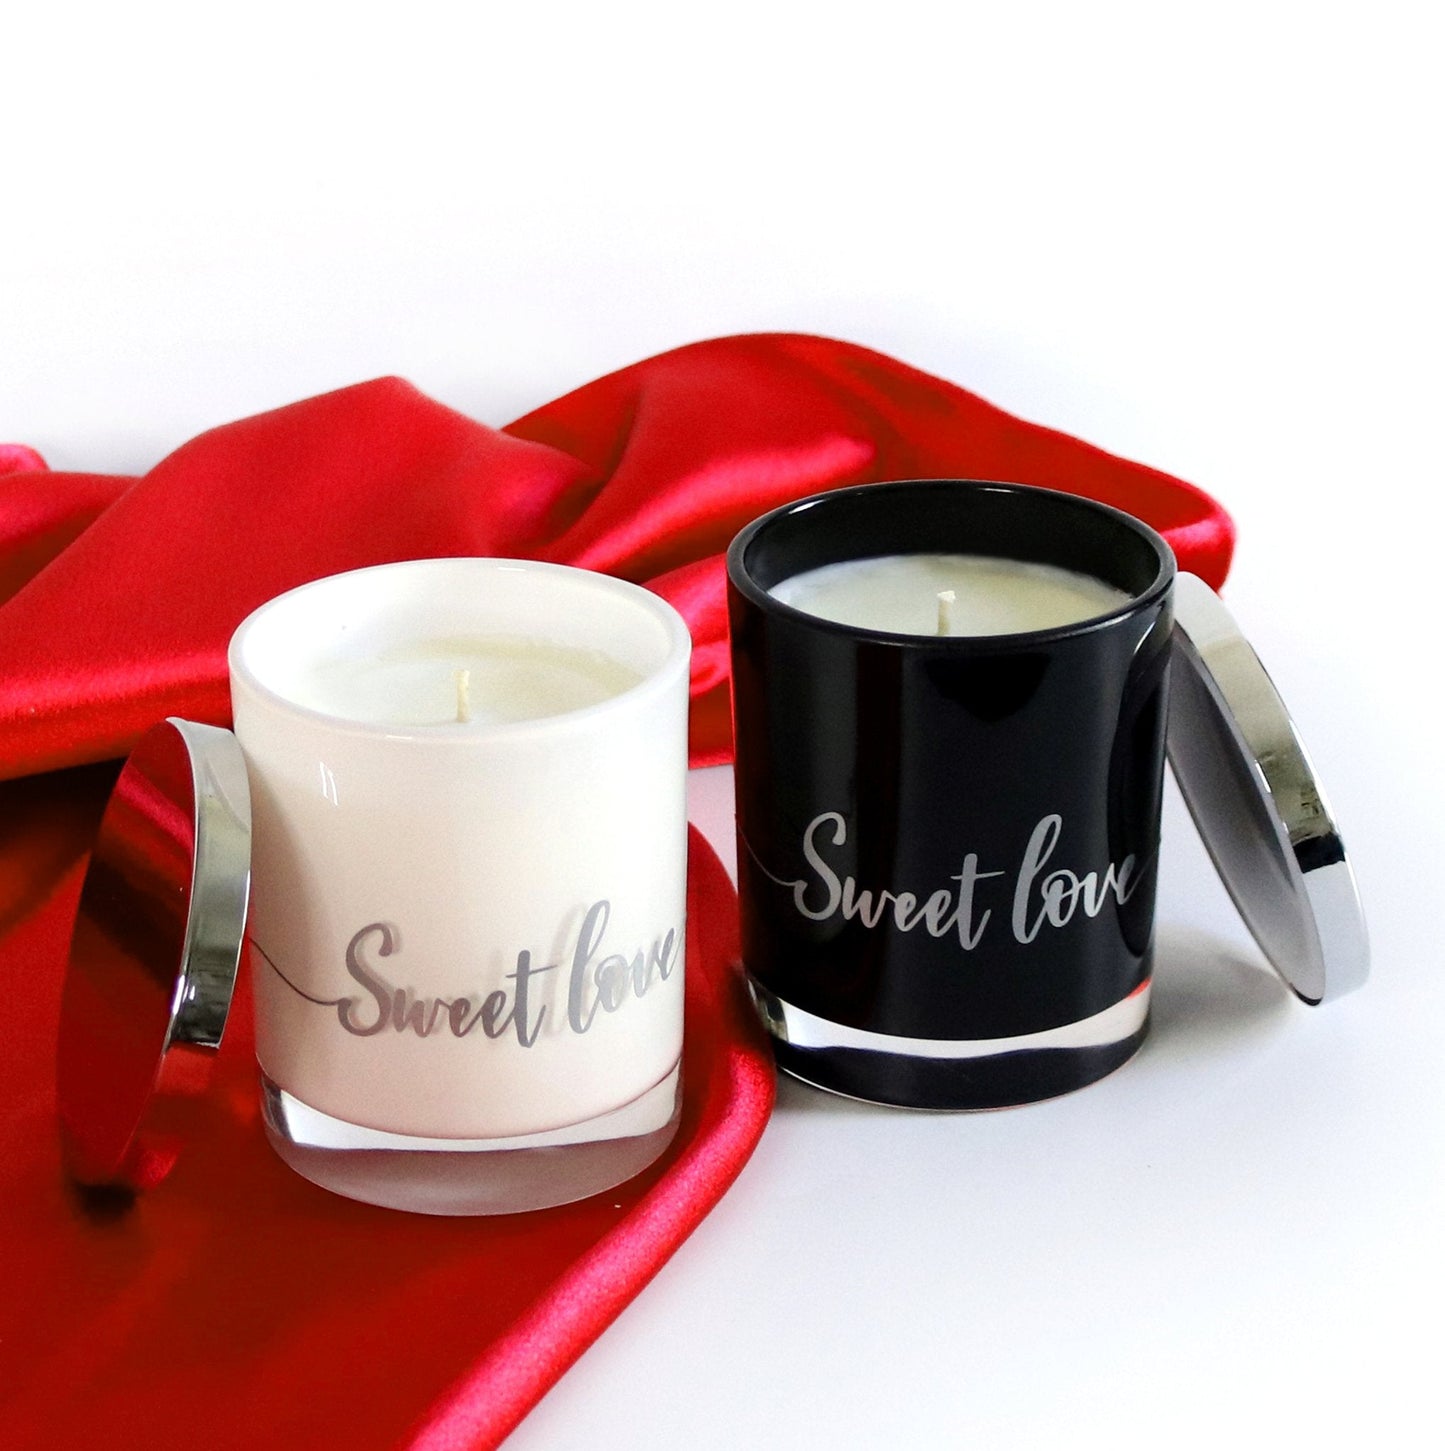 Personlised scented candle